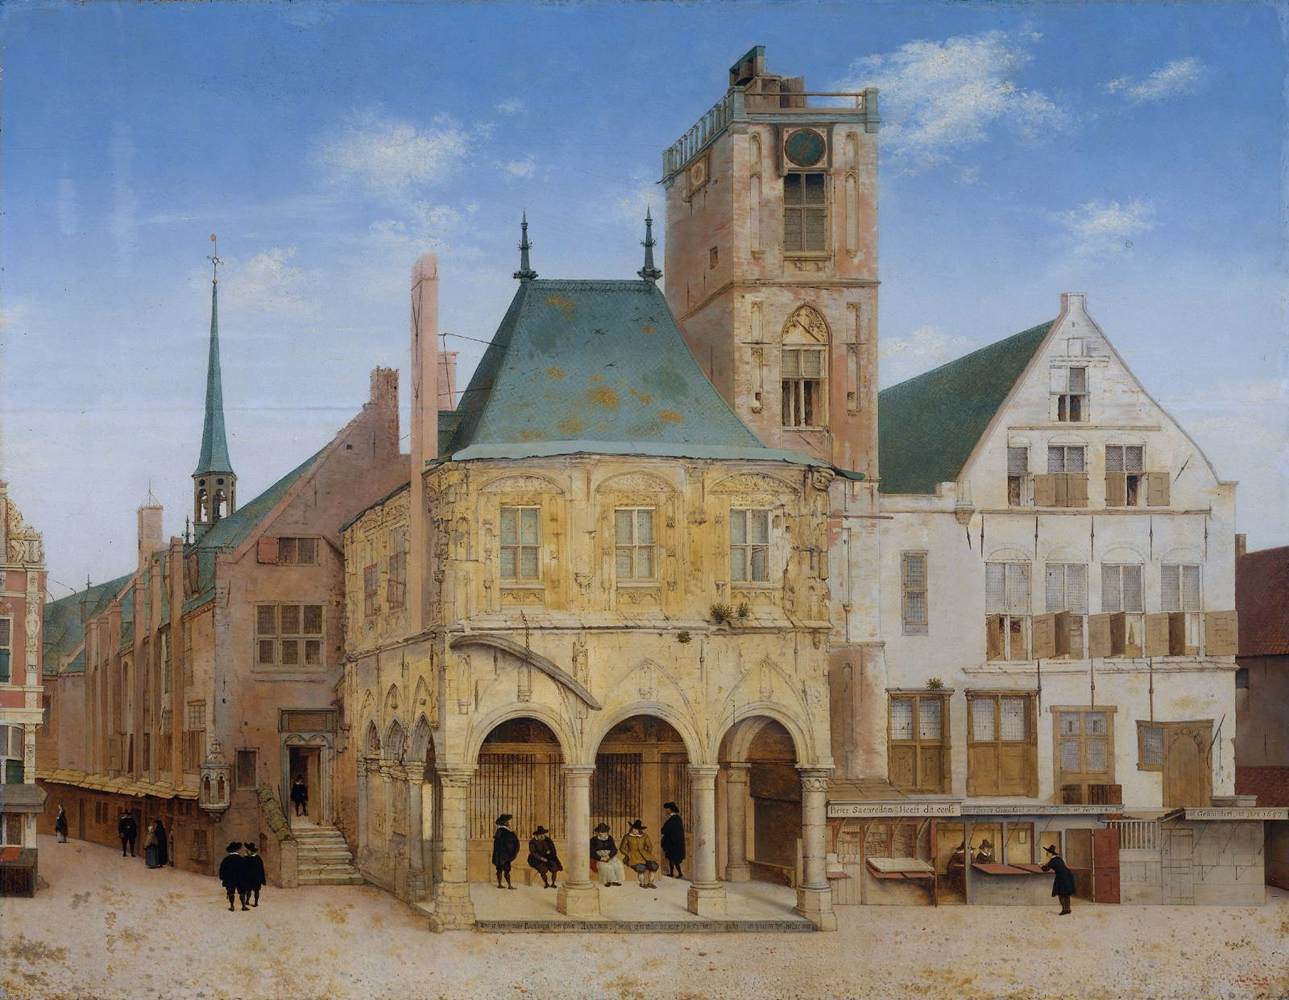 Old Amsterdam City Council